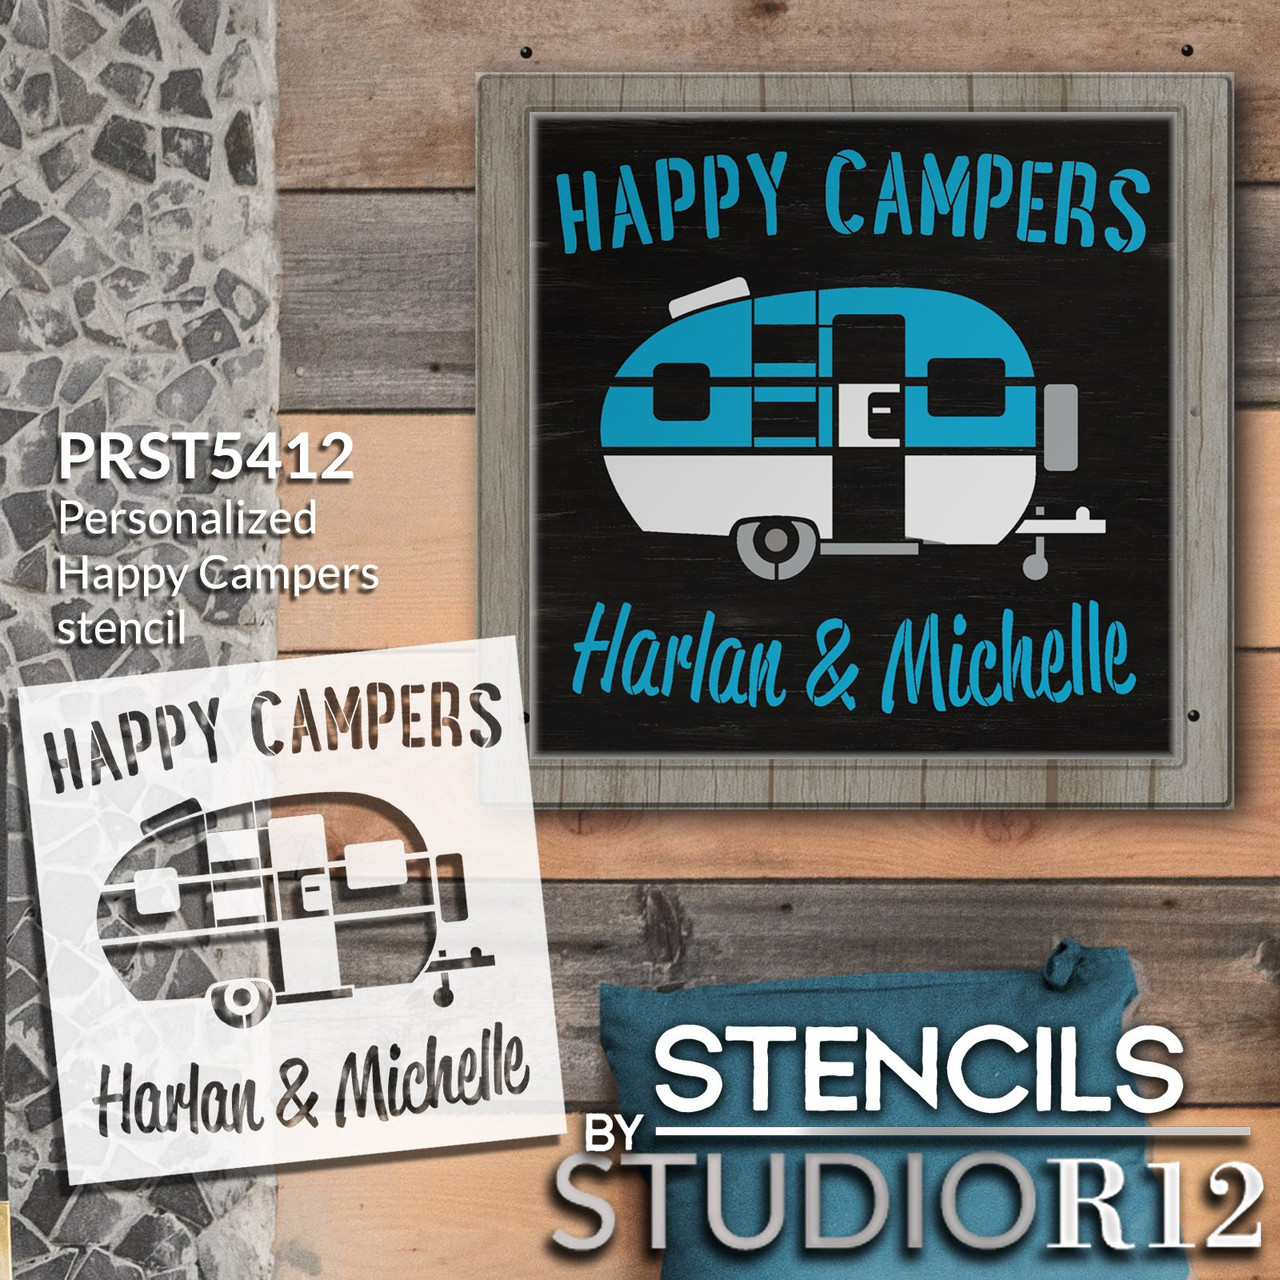 Personalized Happy Campers Stencil by StudioR12 - Select Size - USA Made - Craft DIY Camping Outdoors Home Decor | Paint Custom Family Wood Sign | Reusable Mylar Template